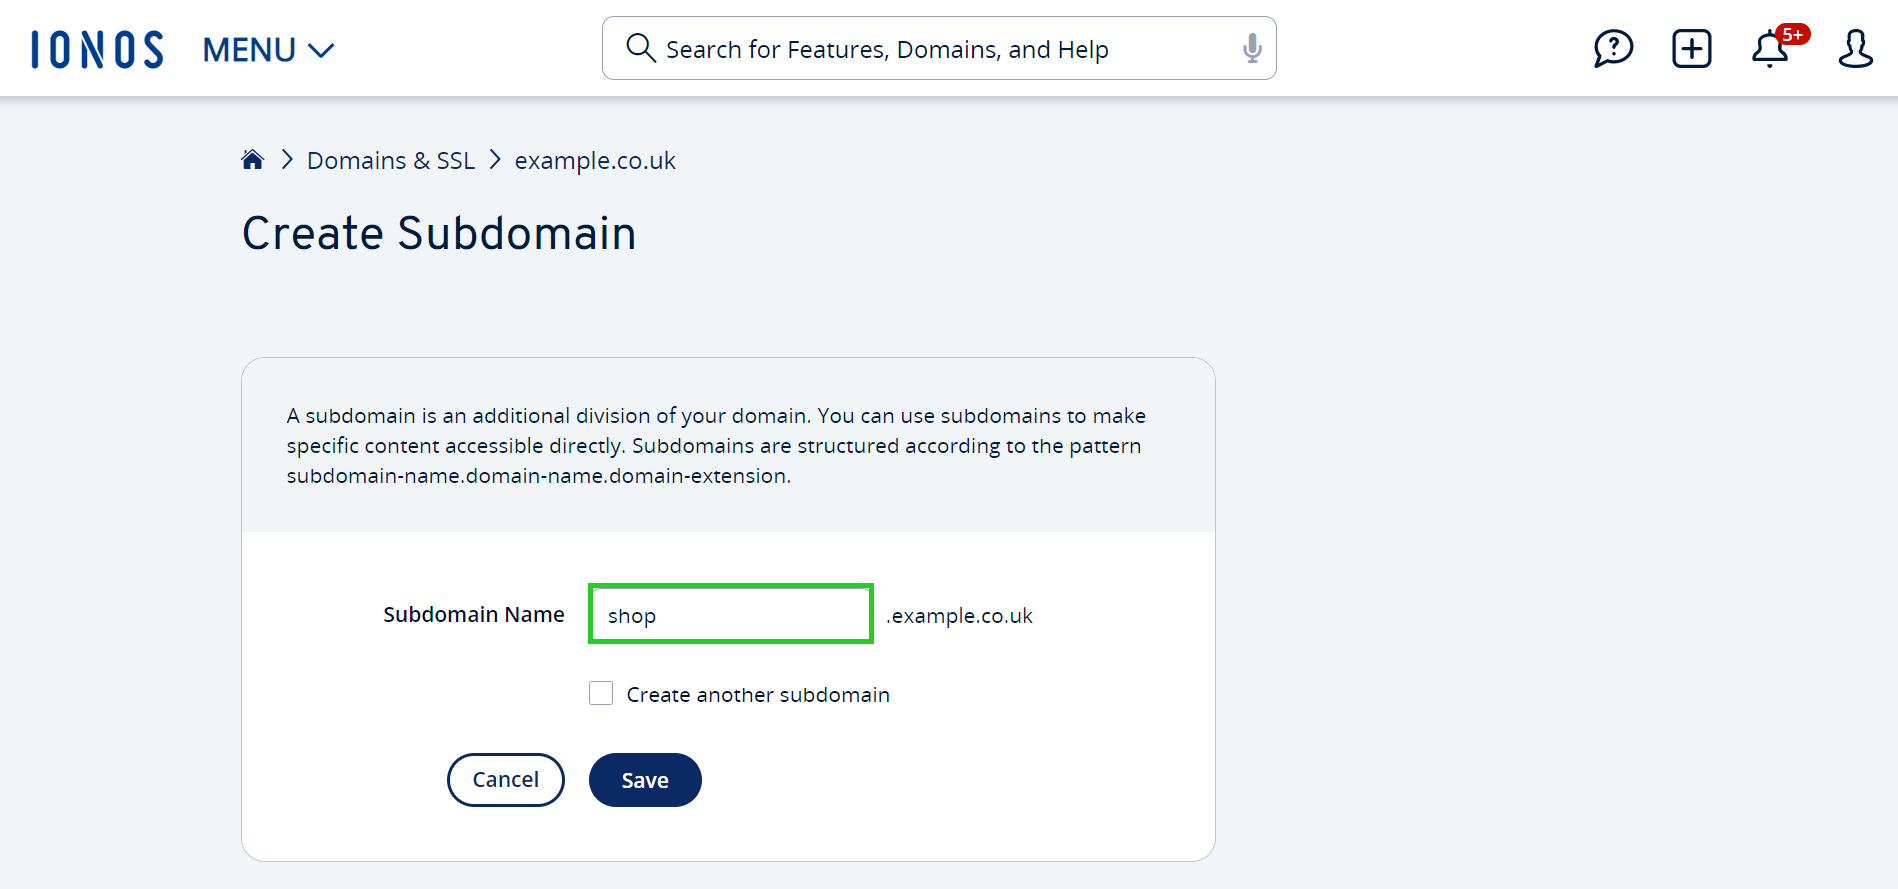 Transferring Domains with Websites, Emails, and Subdomains - IONOS Help